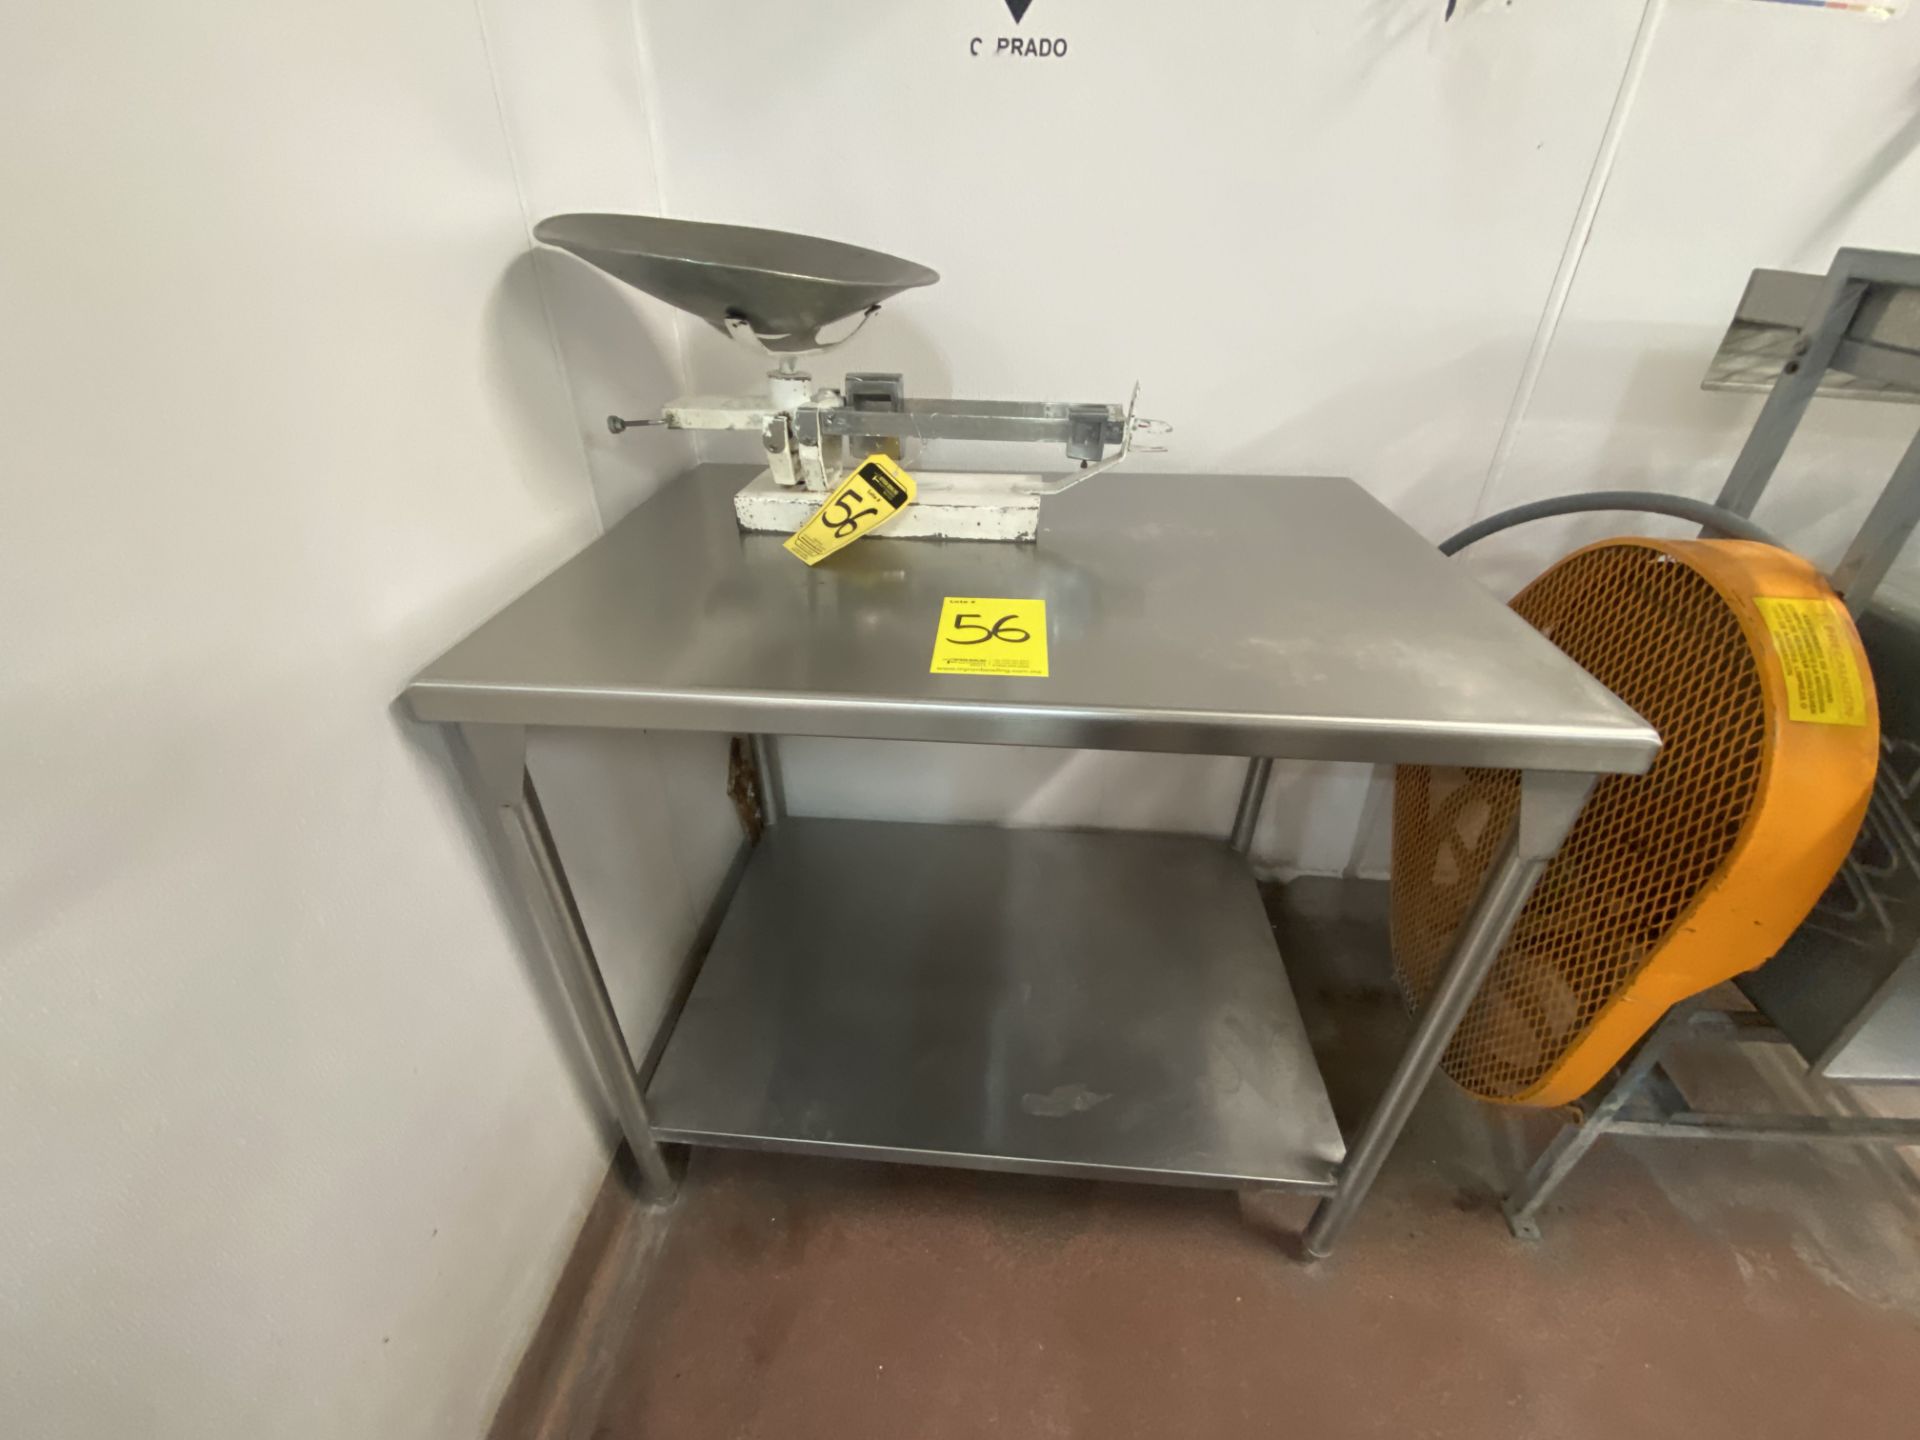 1 Stainless steel work table measures 1.00 x 0.70 x 0.90 meters; Includes balance scale